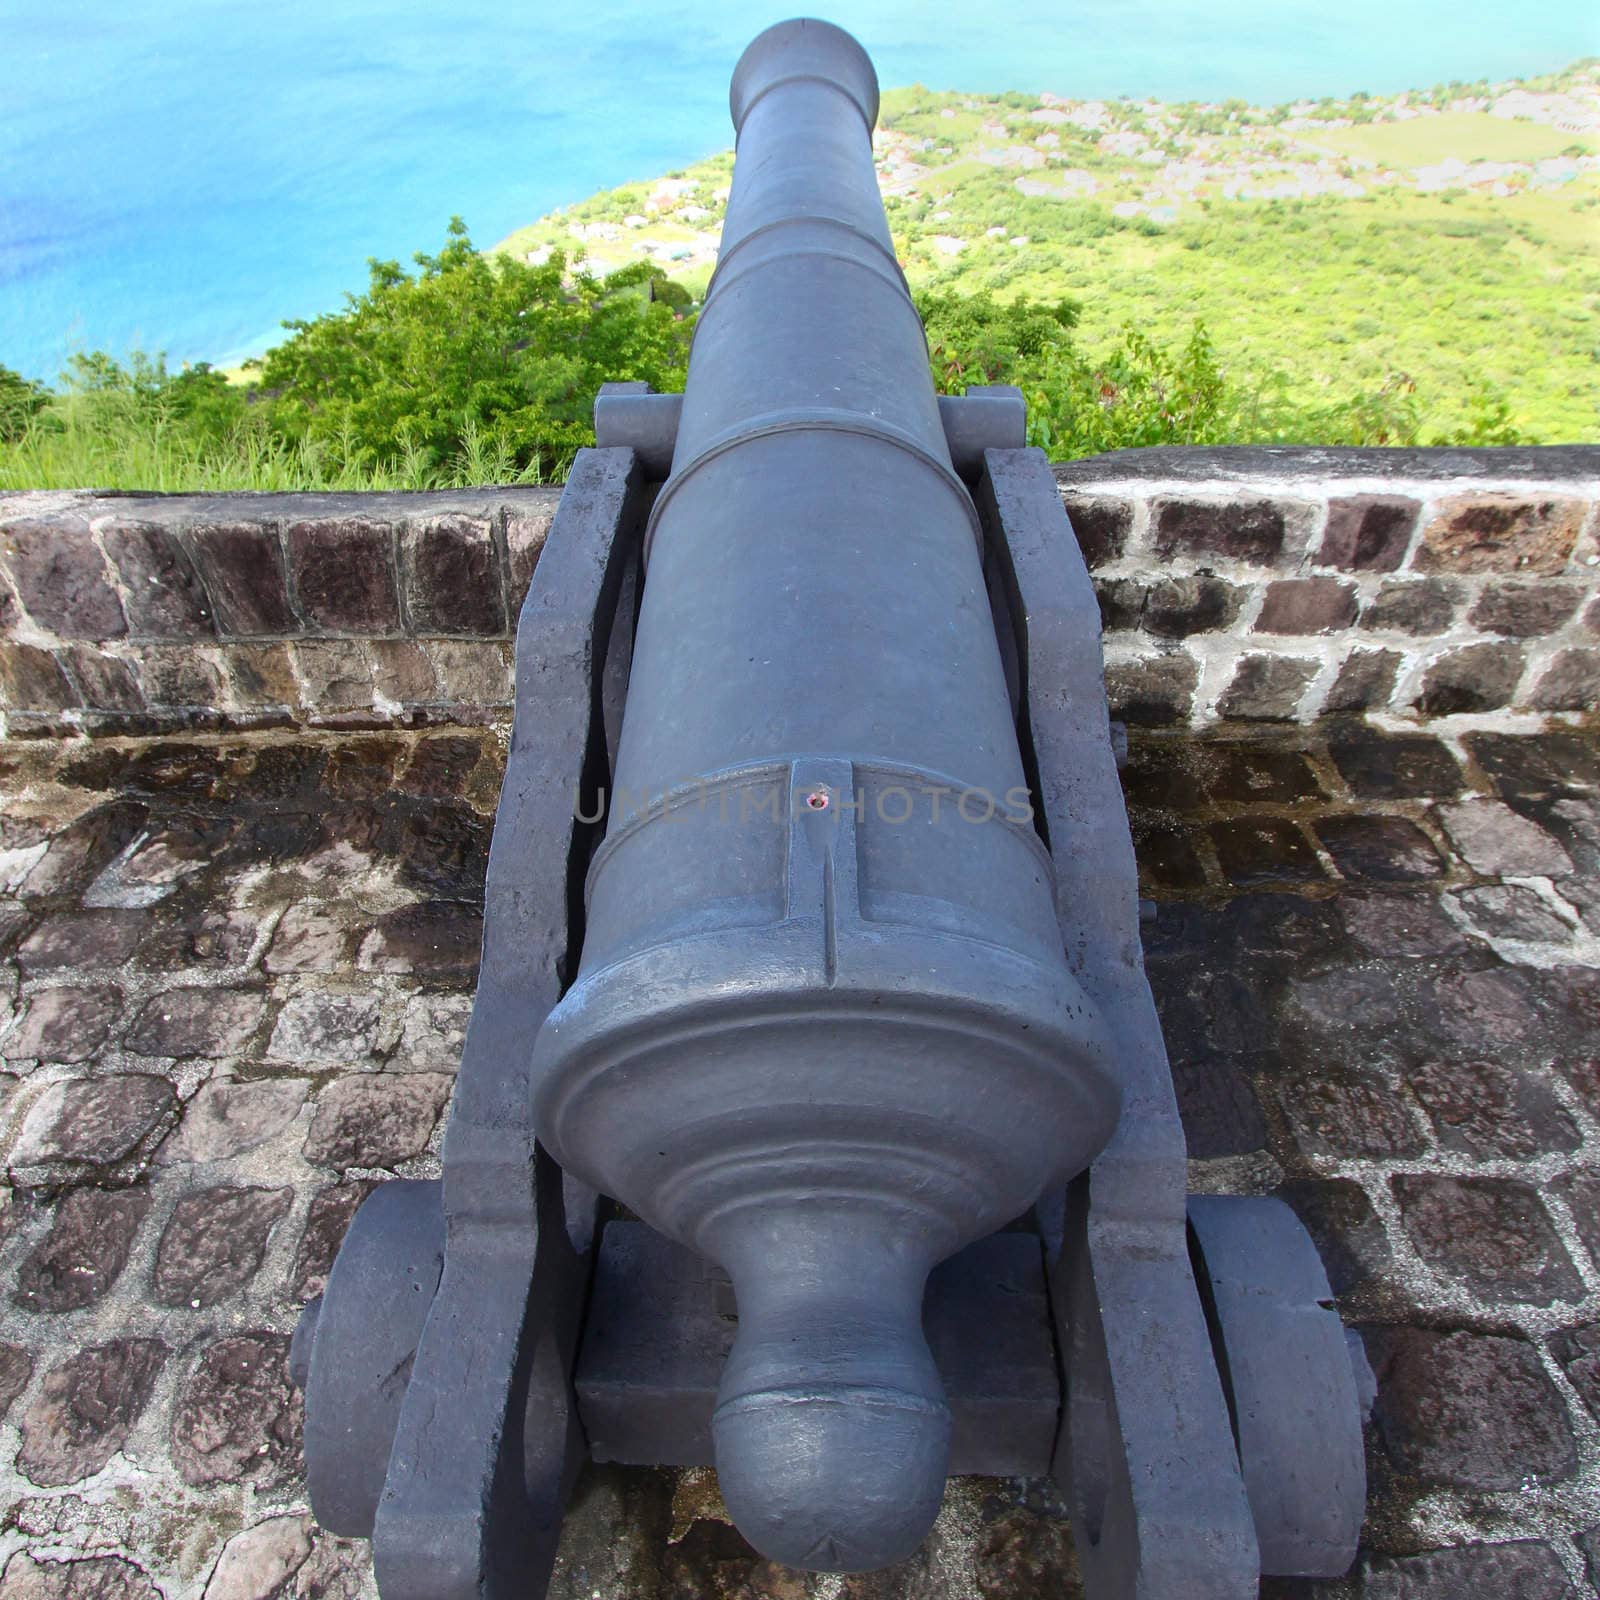 Brimstone Hill Fortress - St Kitts by Wirepec